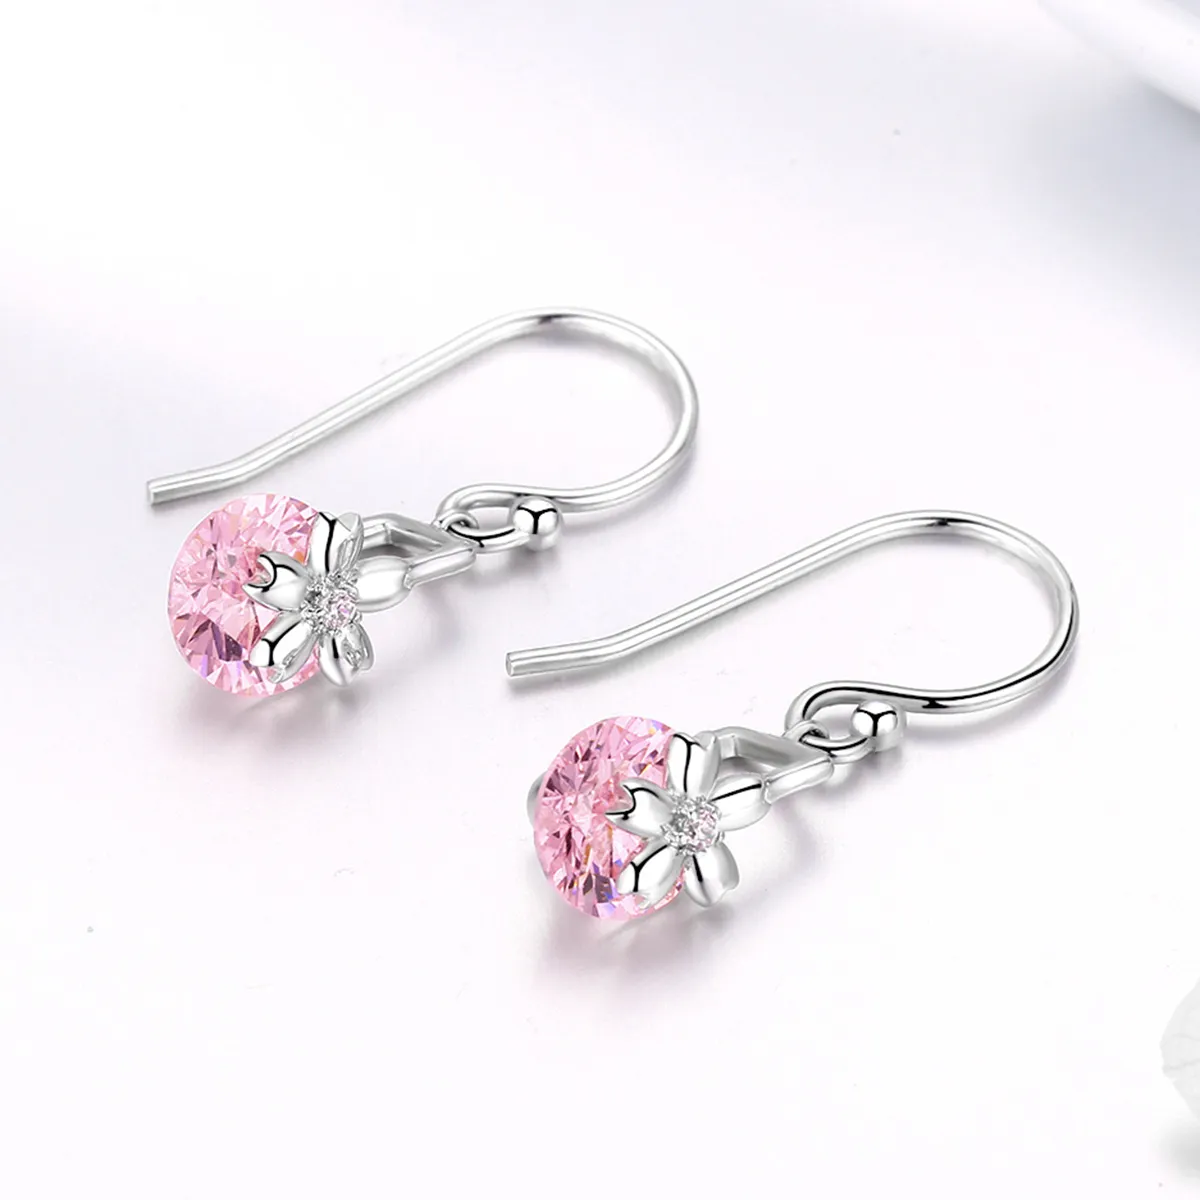 Pandora Style Cherry Blossoms Hanging Earrings - BSE039